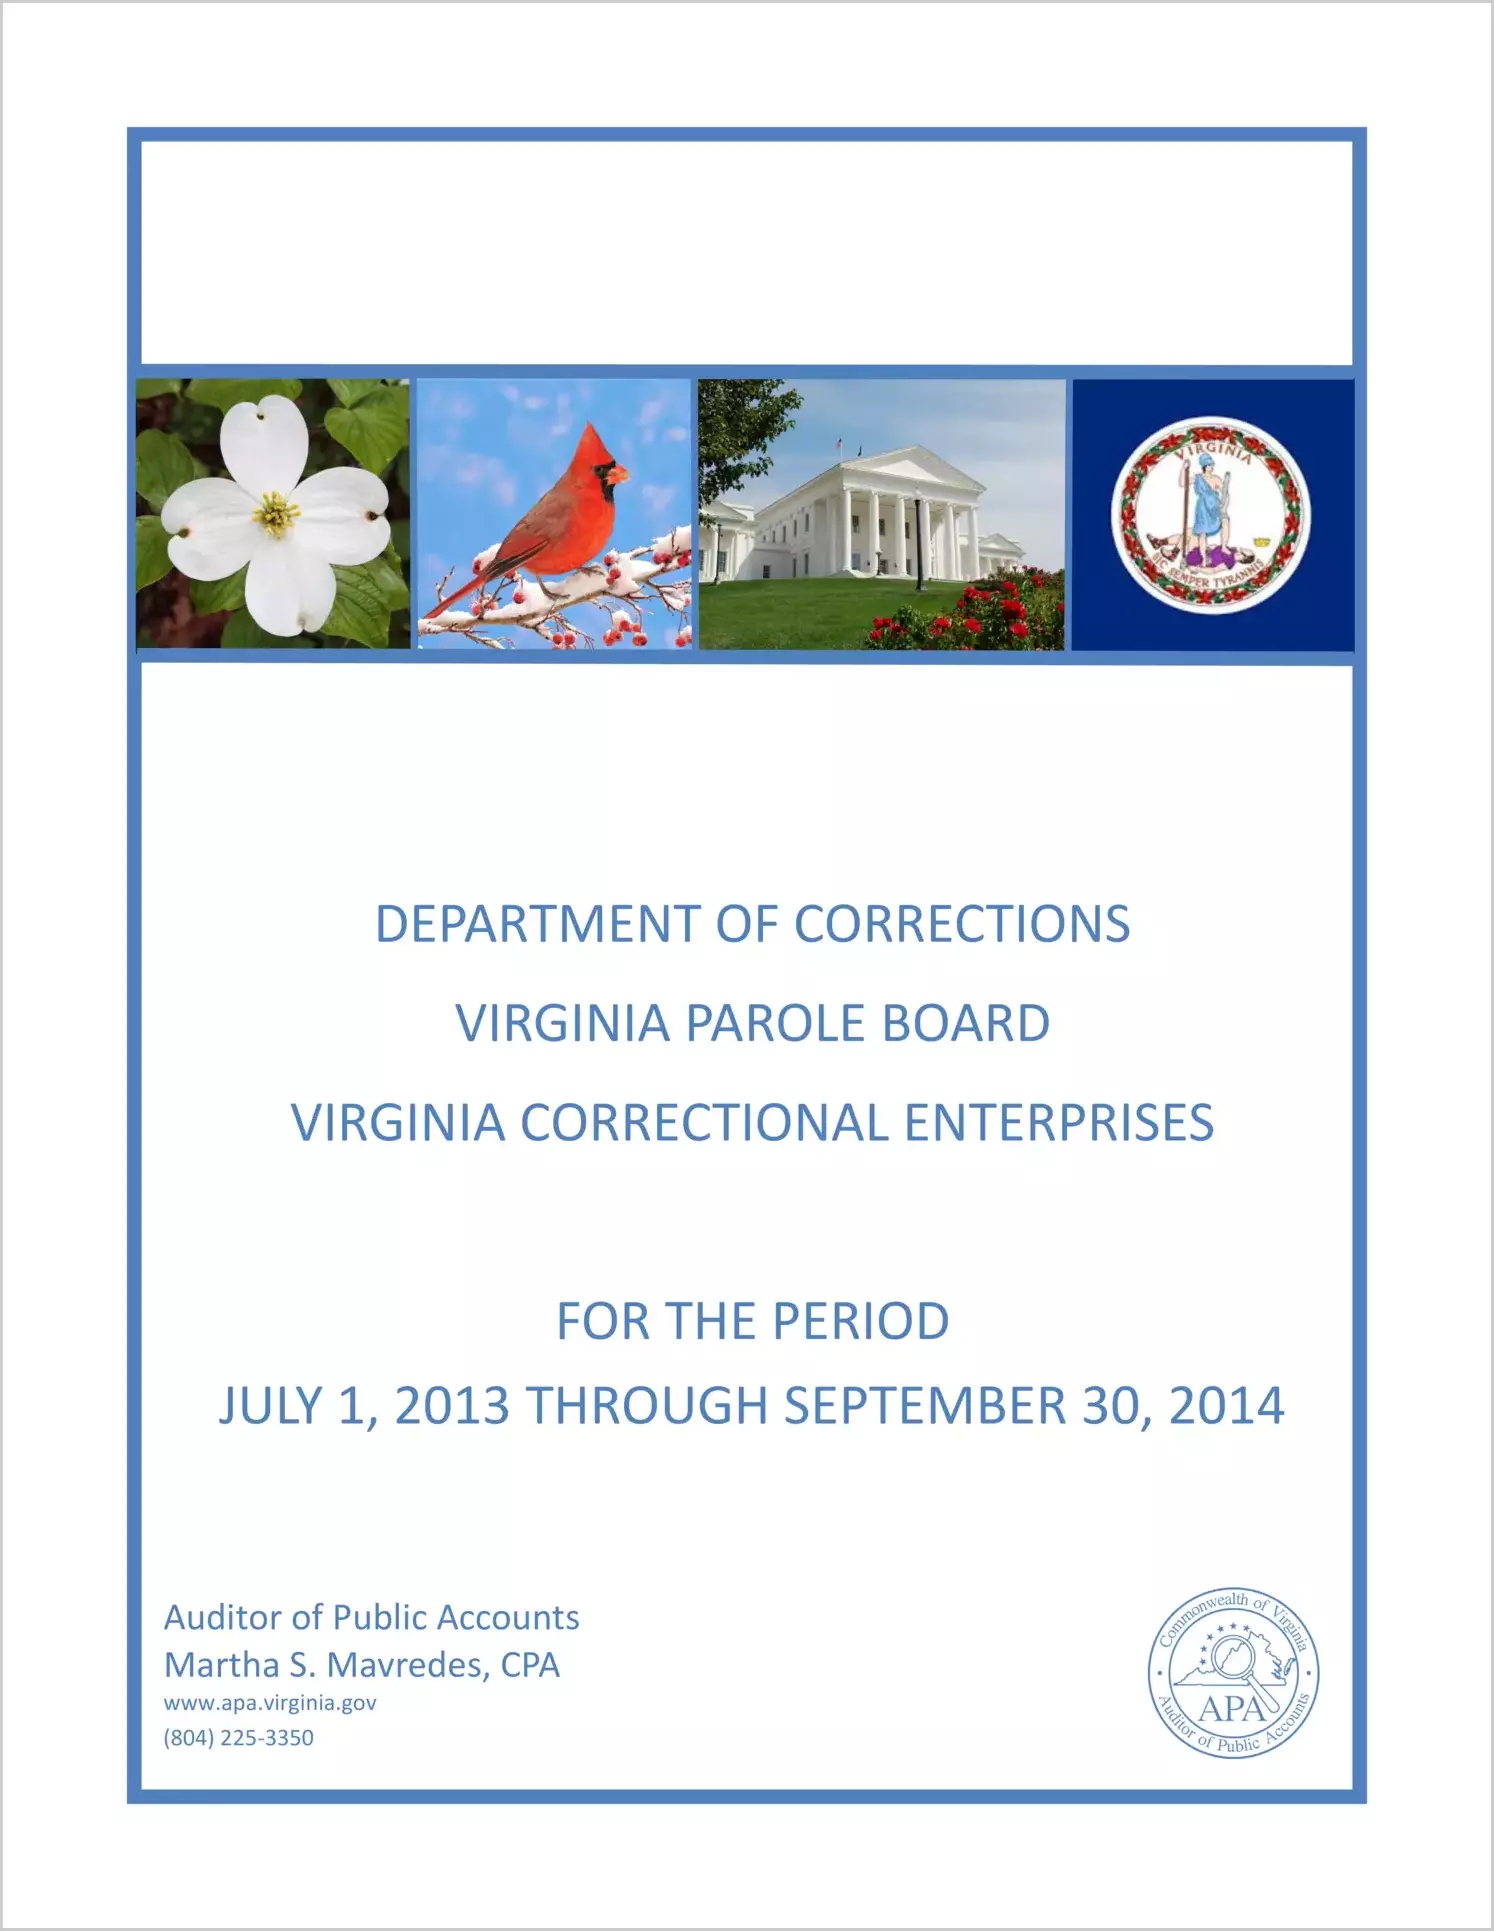 Department of Corrections, Virginia Parole Board and Virginia Correctional Enterprises report on audit for the period July 1, 2013 through September 30, 2014